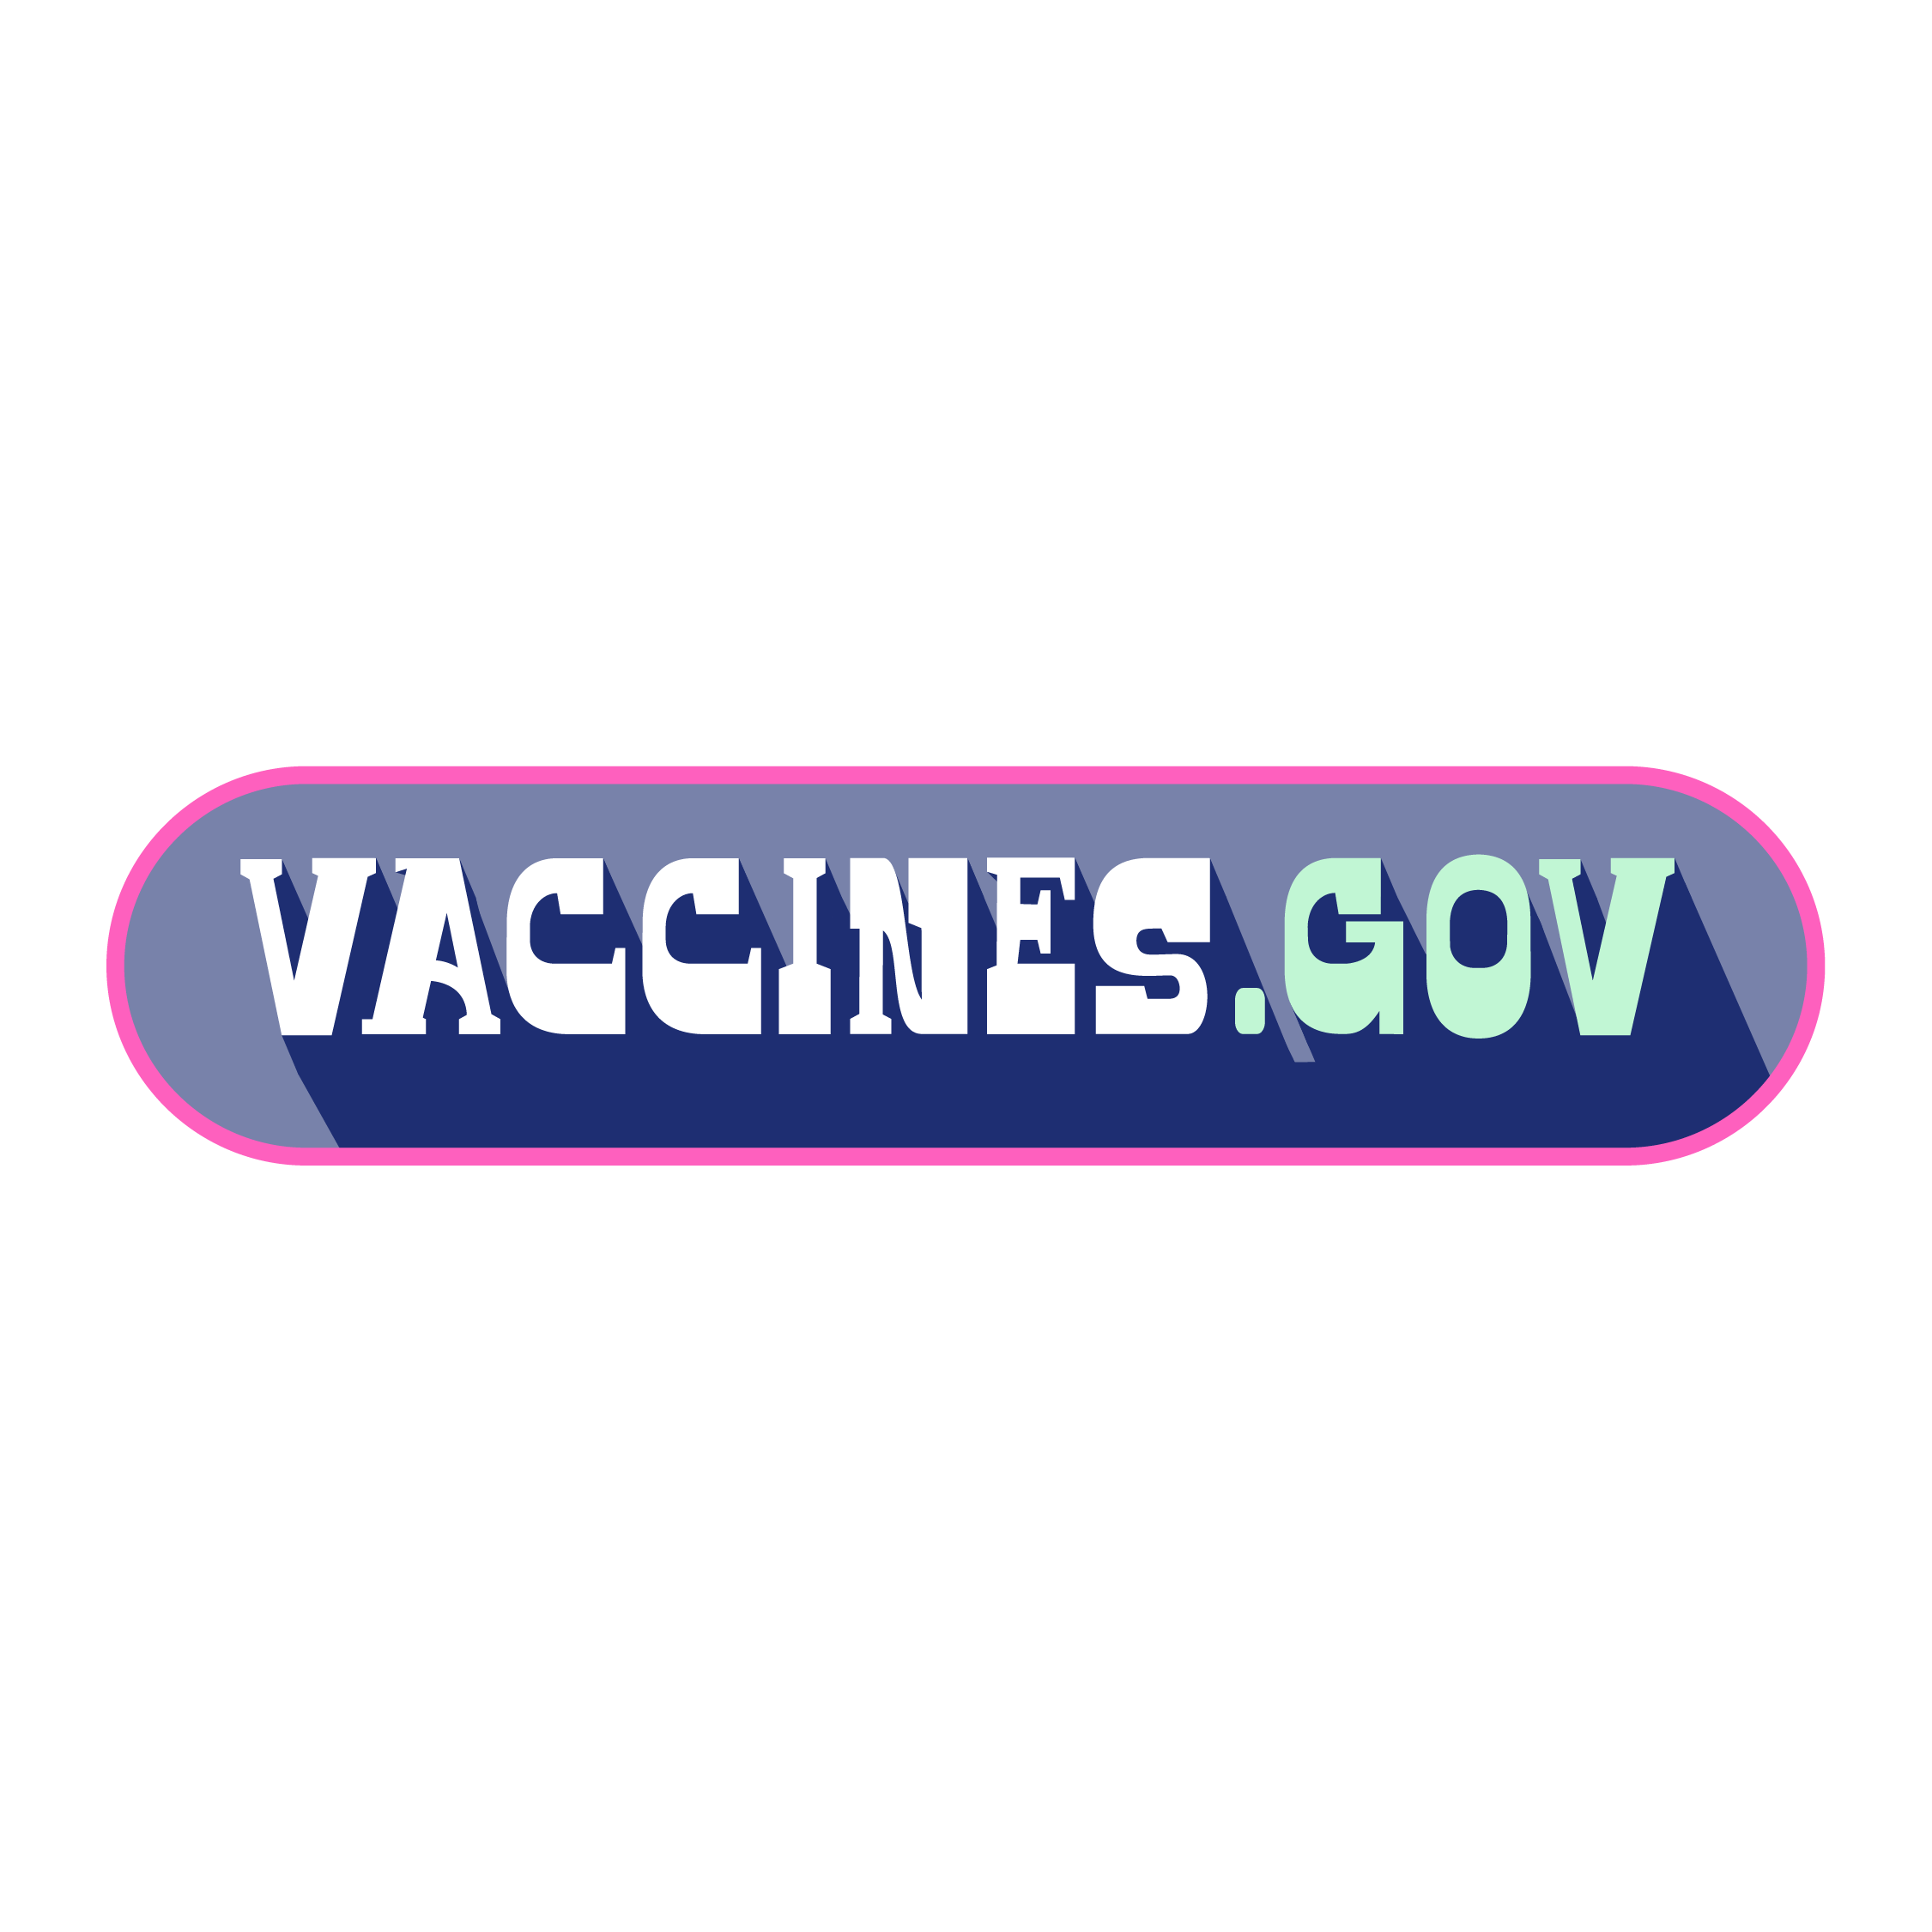 Illustrated lettering that says "vaccines.gov"